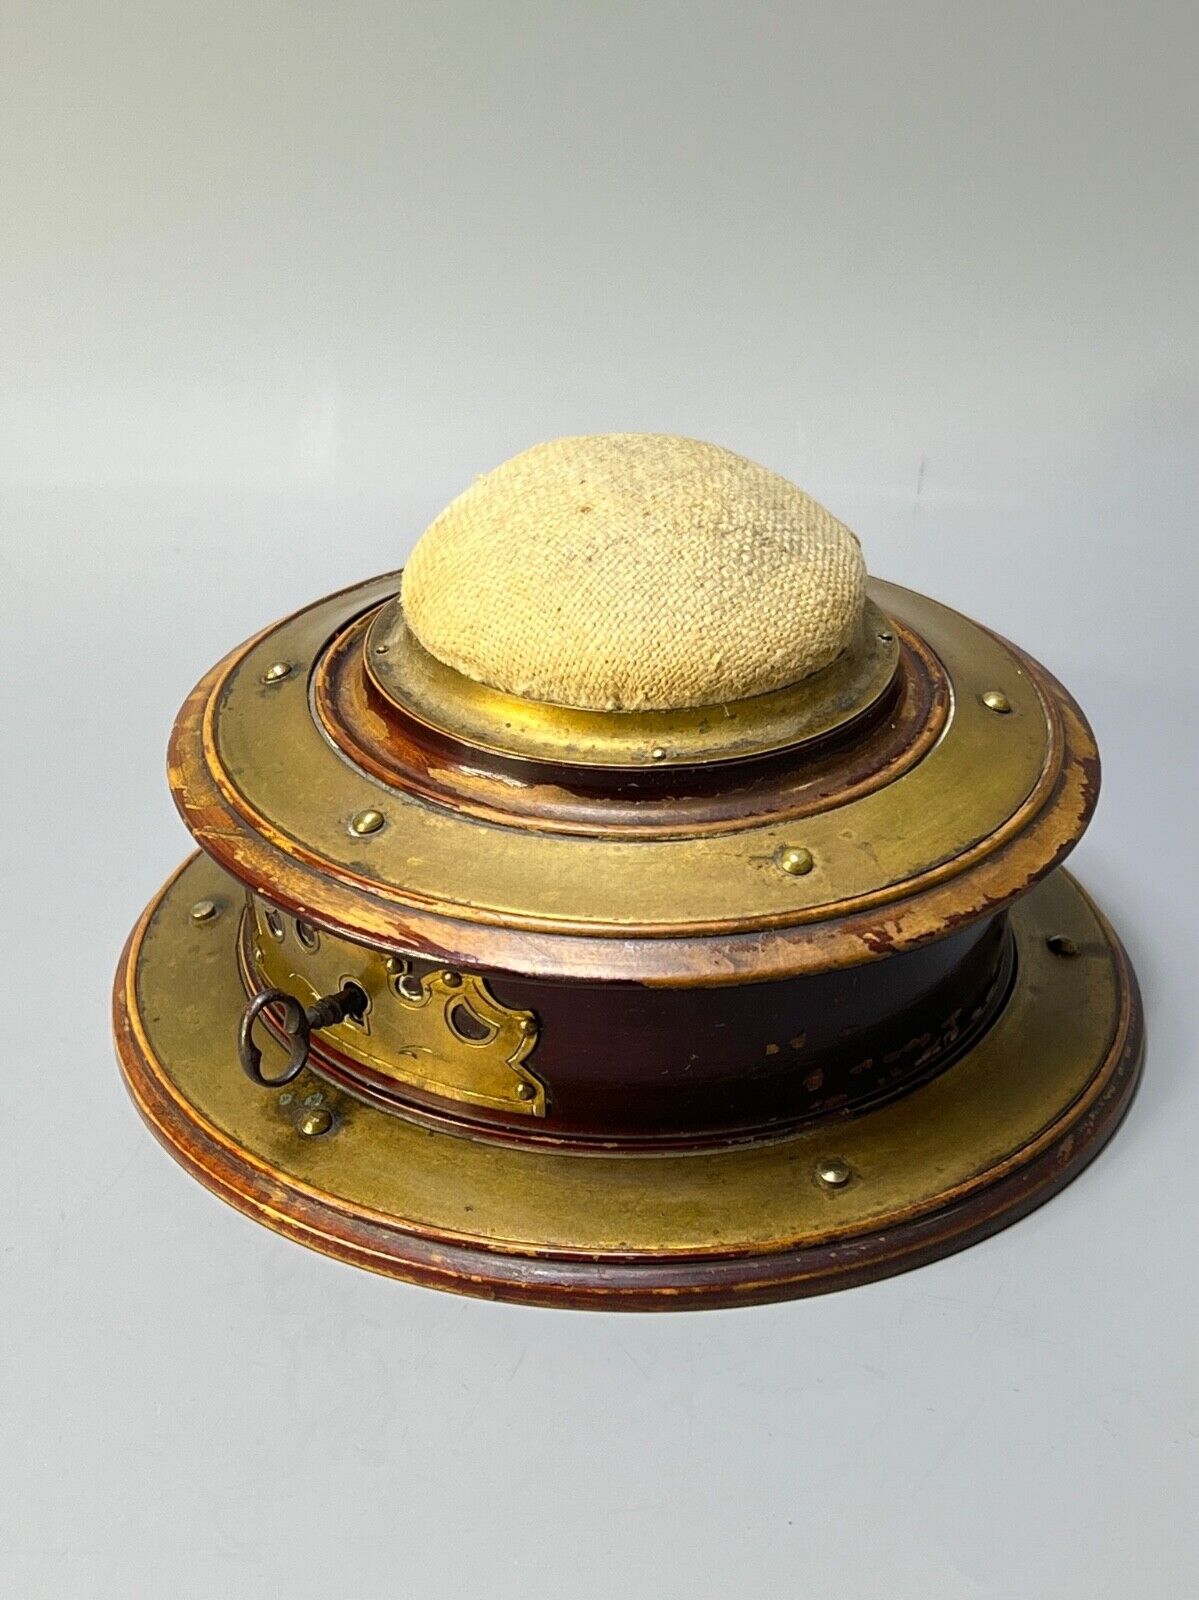 19c. Victorian Round Sewing Box Lacquered Oak W Lock Integrate Pin Cushion Lid